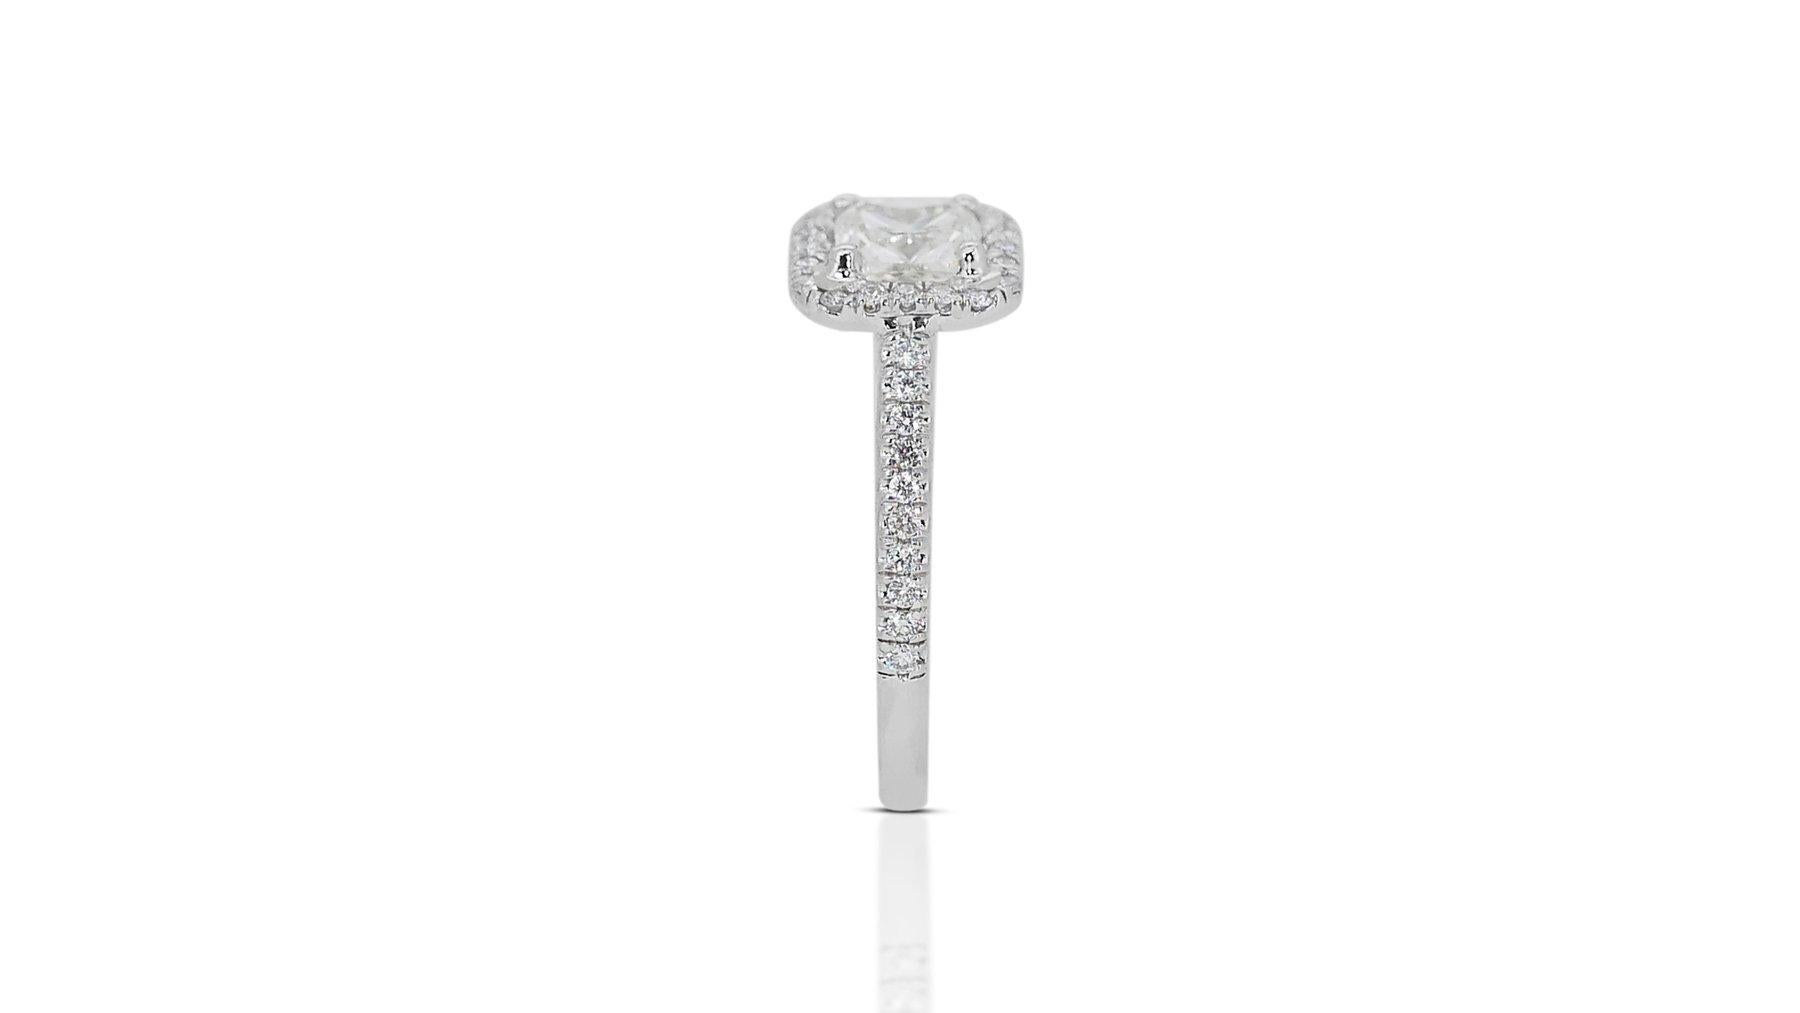 Majestic 1.71ct Diamond Halo Ring in 18k White Gold - GIA Certified In New Condition For Sale In רמת גן, IL